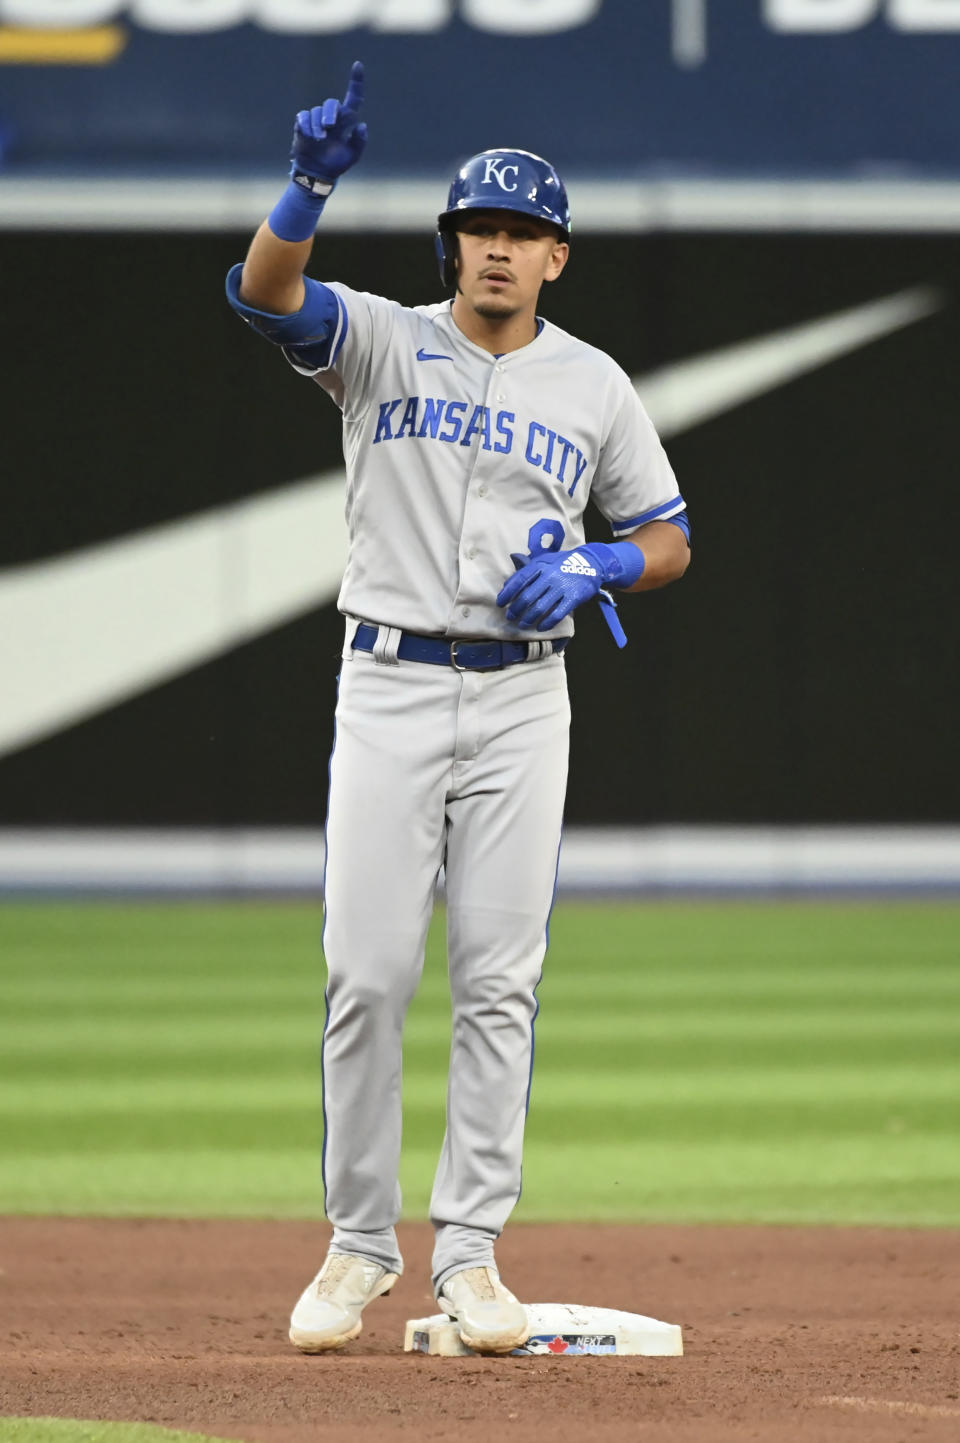 Kansas City Royals' Nicky Lopez gestures to the dugout after hitting a double against the Toronto Blue Jays during the fifth inning of a baseball game Thursday, July 14, 2022, in Toronto. (Jon Blacker/The Canadian Press via AP)